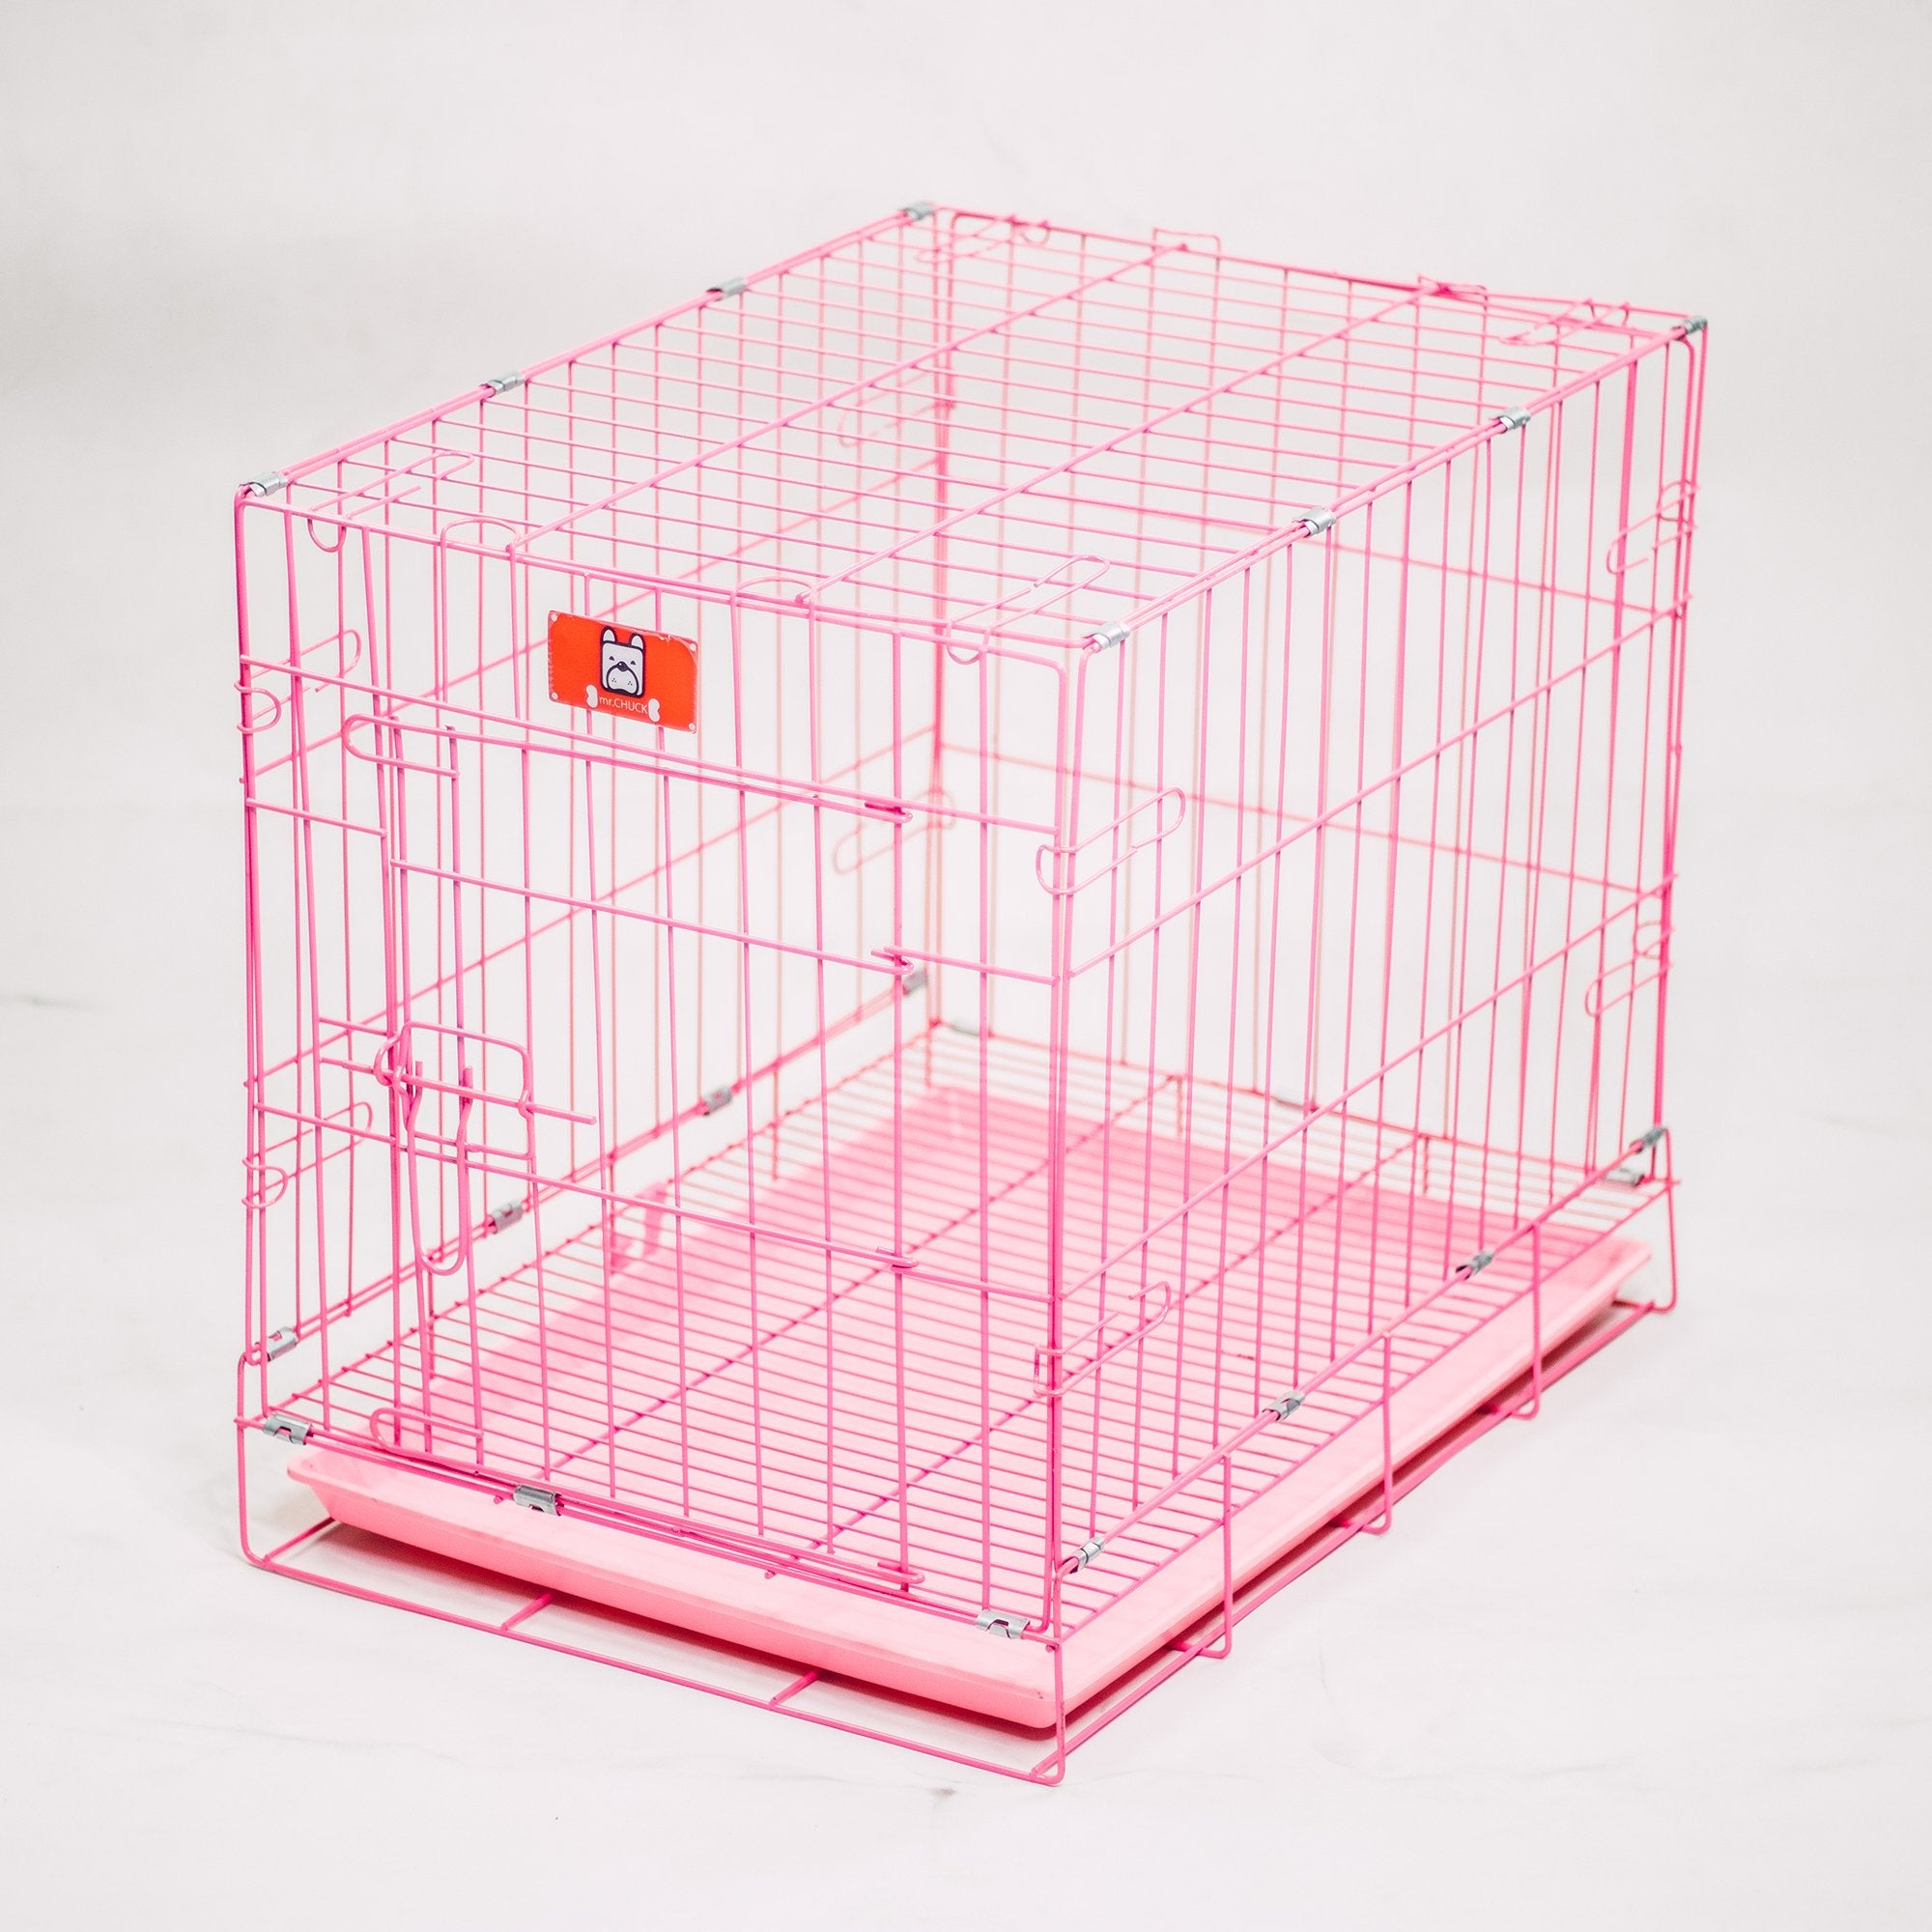 Mr. Chuck - Collapsible Pet Crate Mr. Chuck Pet Store